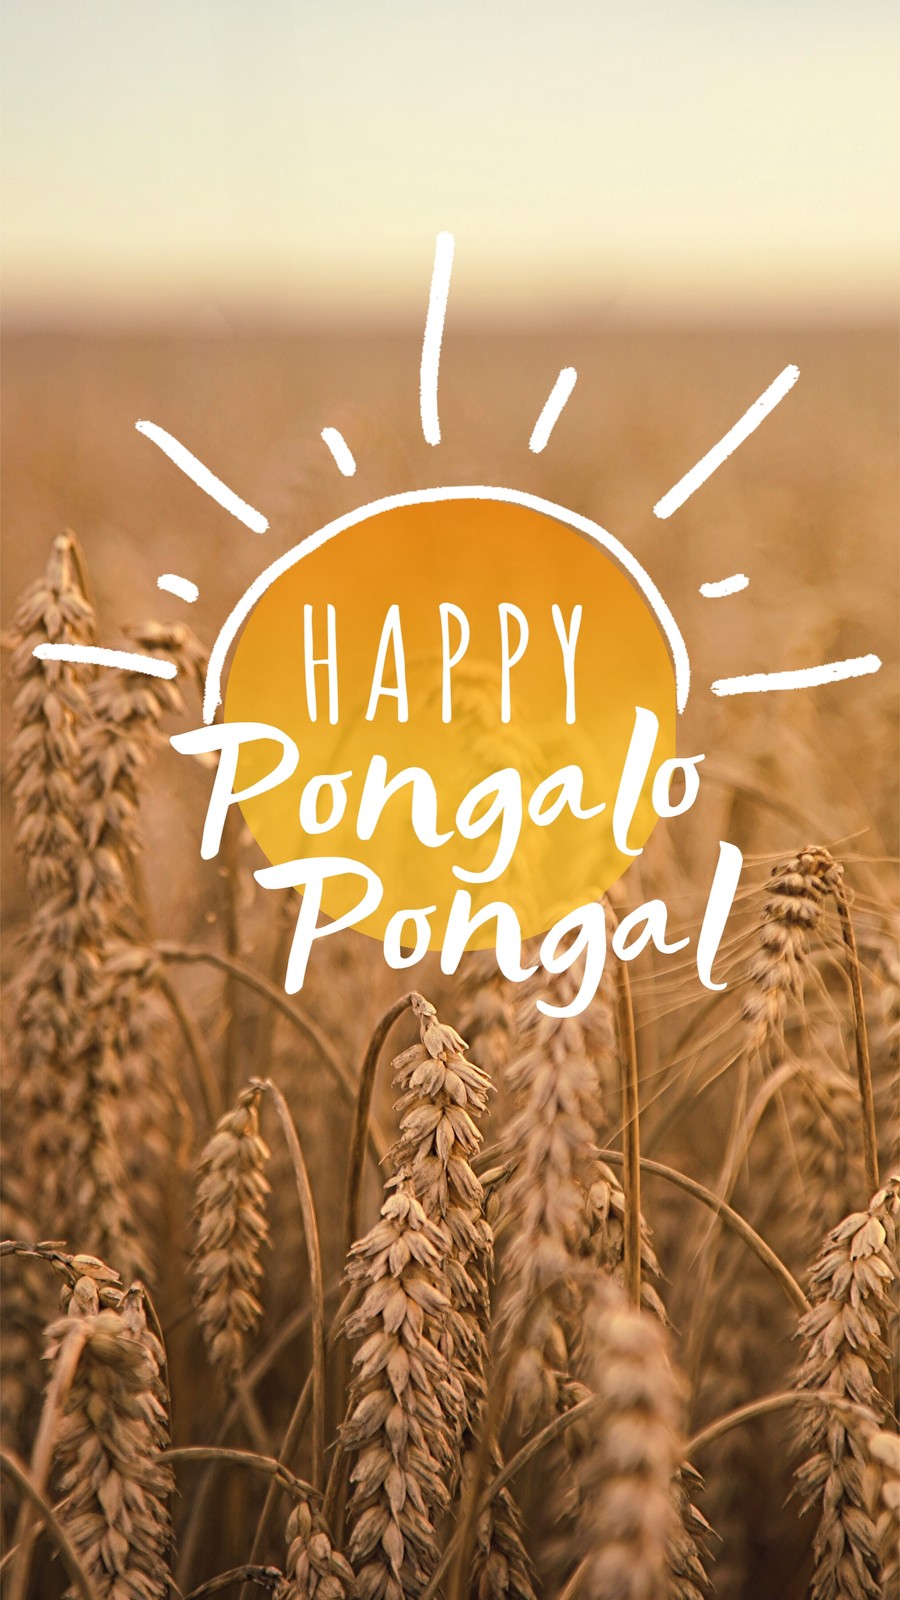 Free and customizable pongal templates